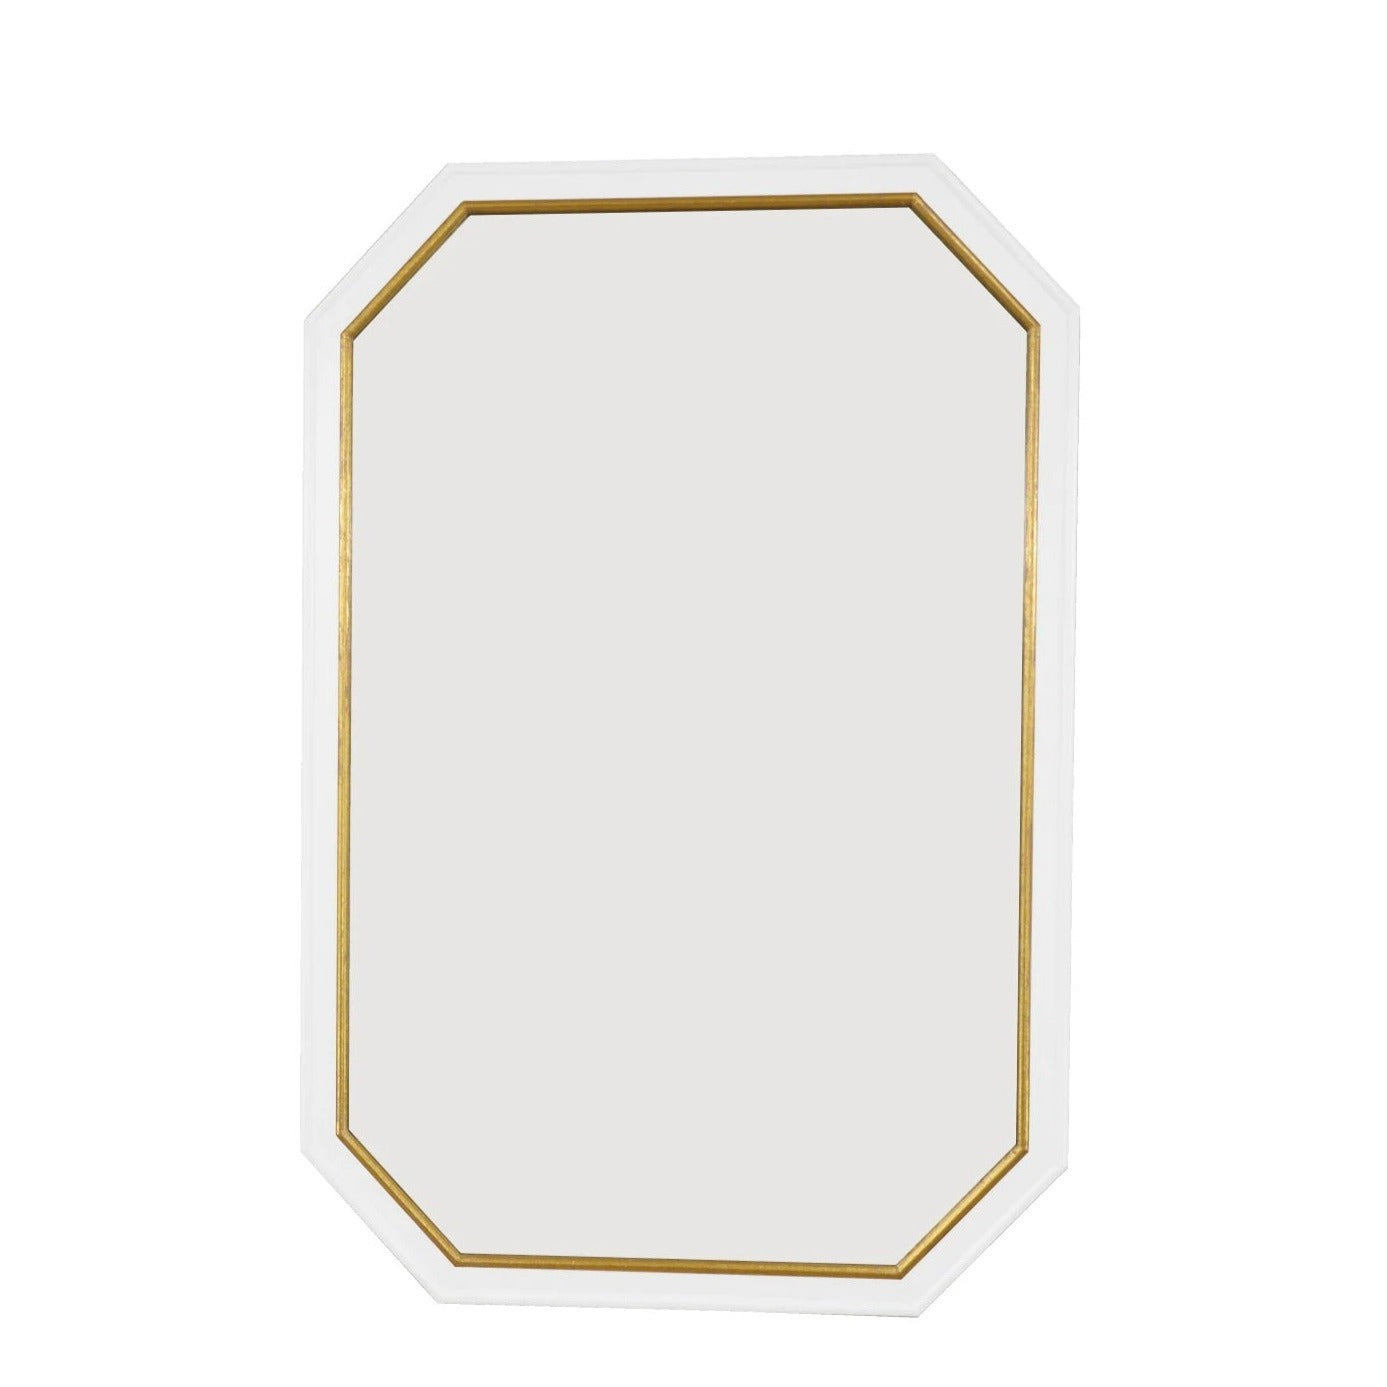 Selina White and Gold Wall Mirror- Lillian Home